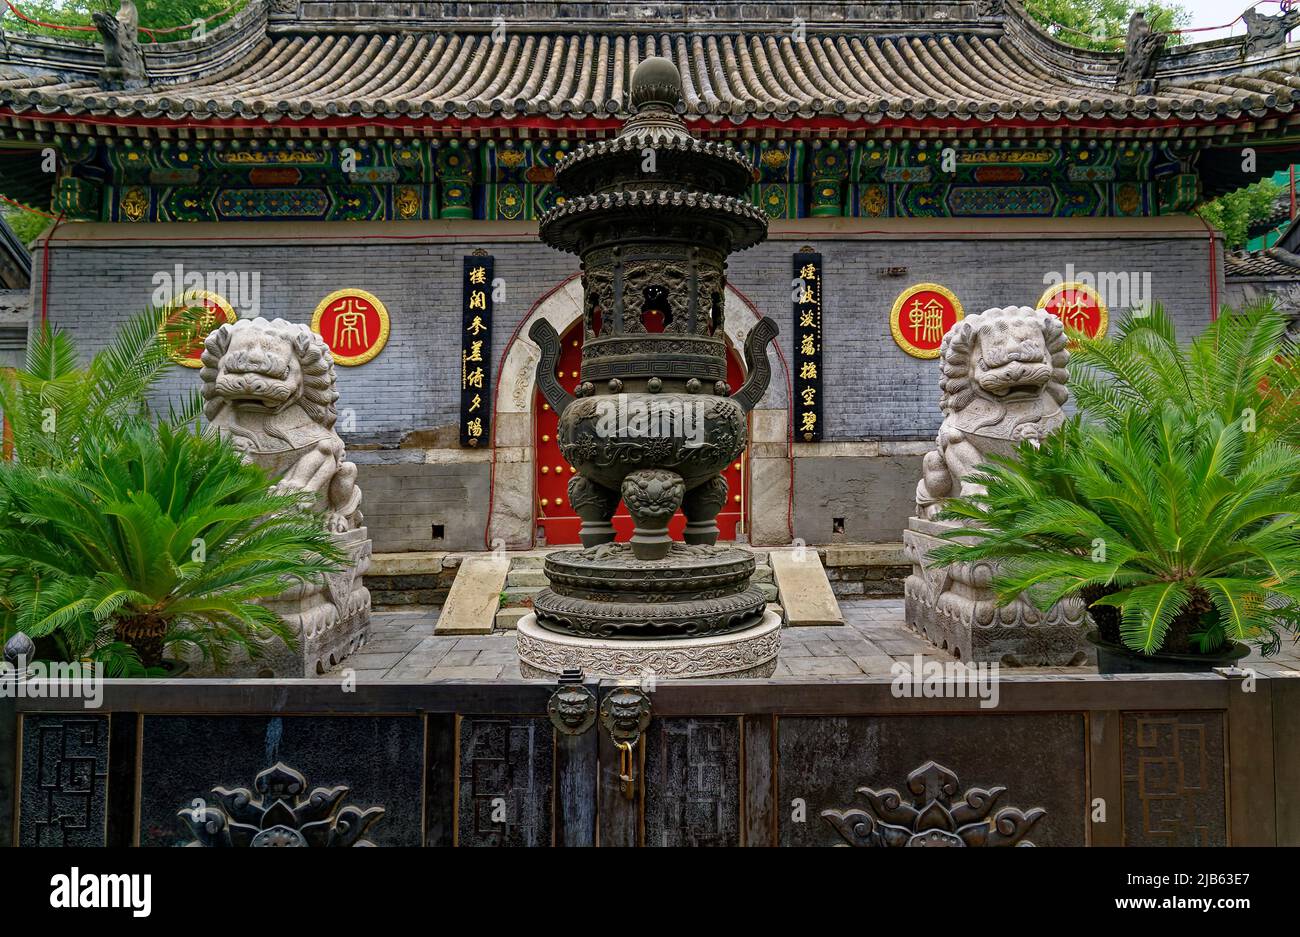 Guanghua Temple. Beijing. China.Guanghua Temple is a Buddhist temple located at 31 Ya'er Hutong, north of Shichahai in the Xicheng District of Stock Photo